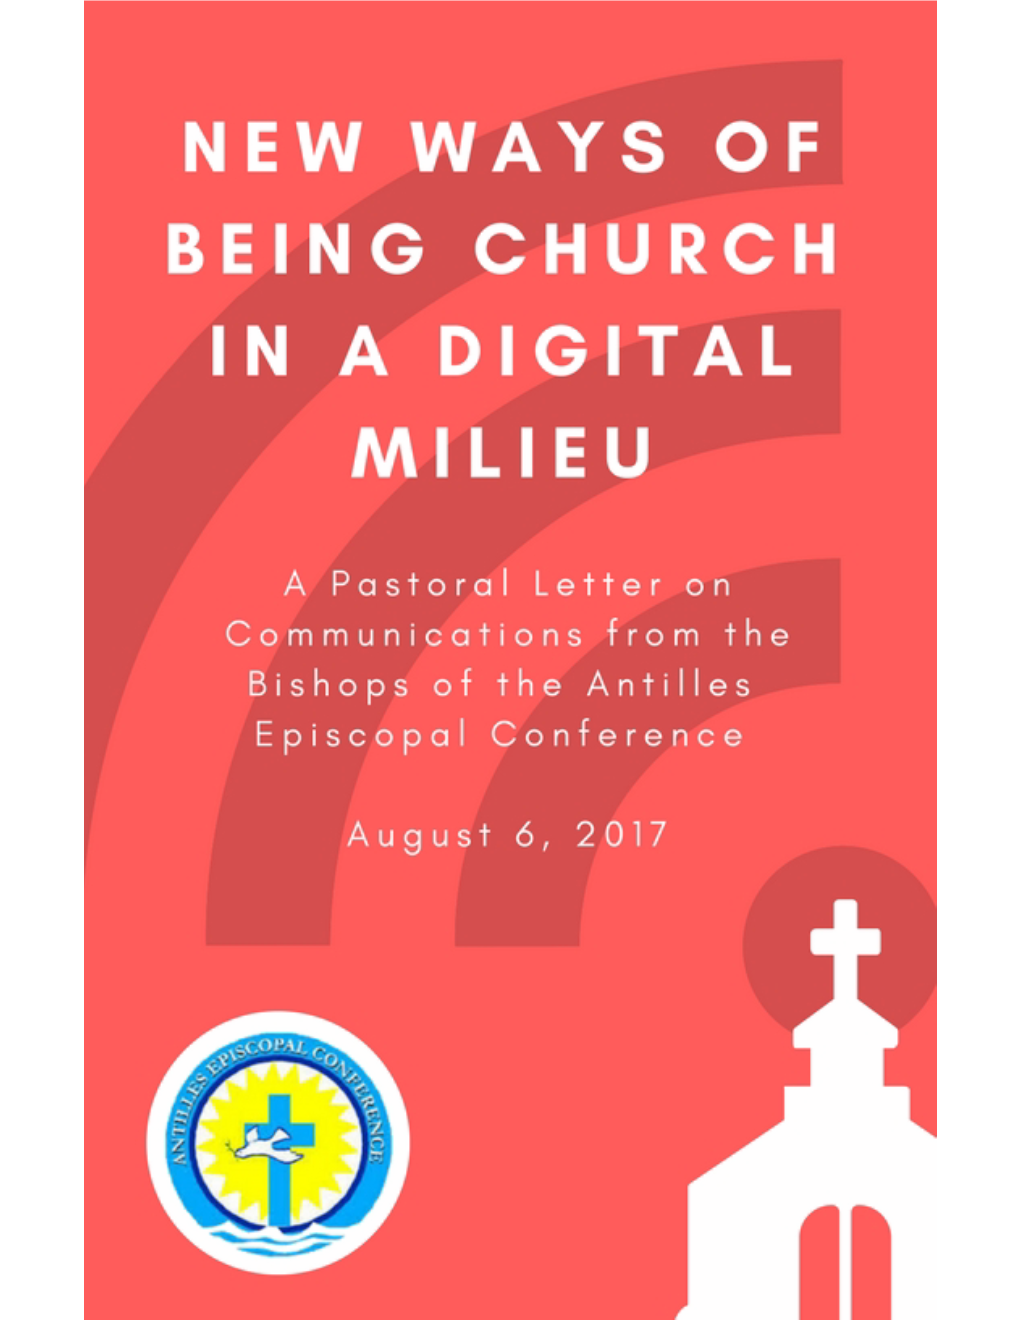 A Pastoral Letter: New Ways of Being Church in a Digital Milieu